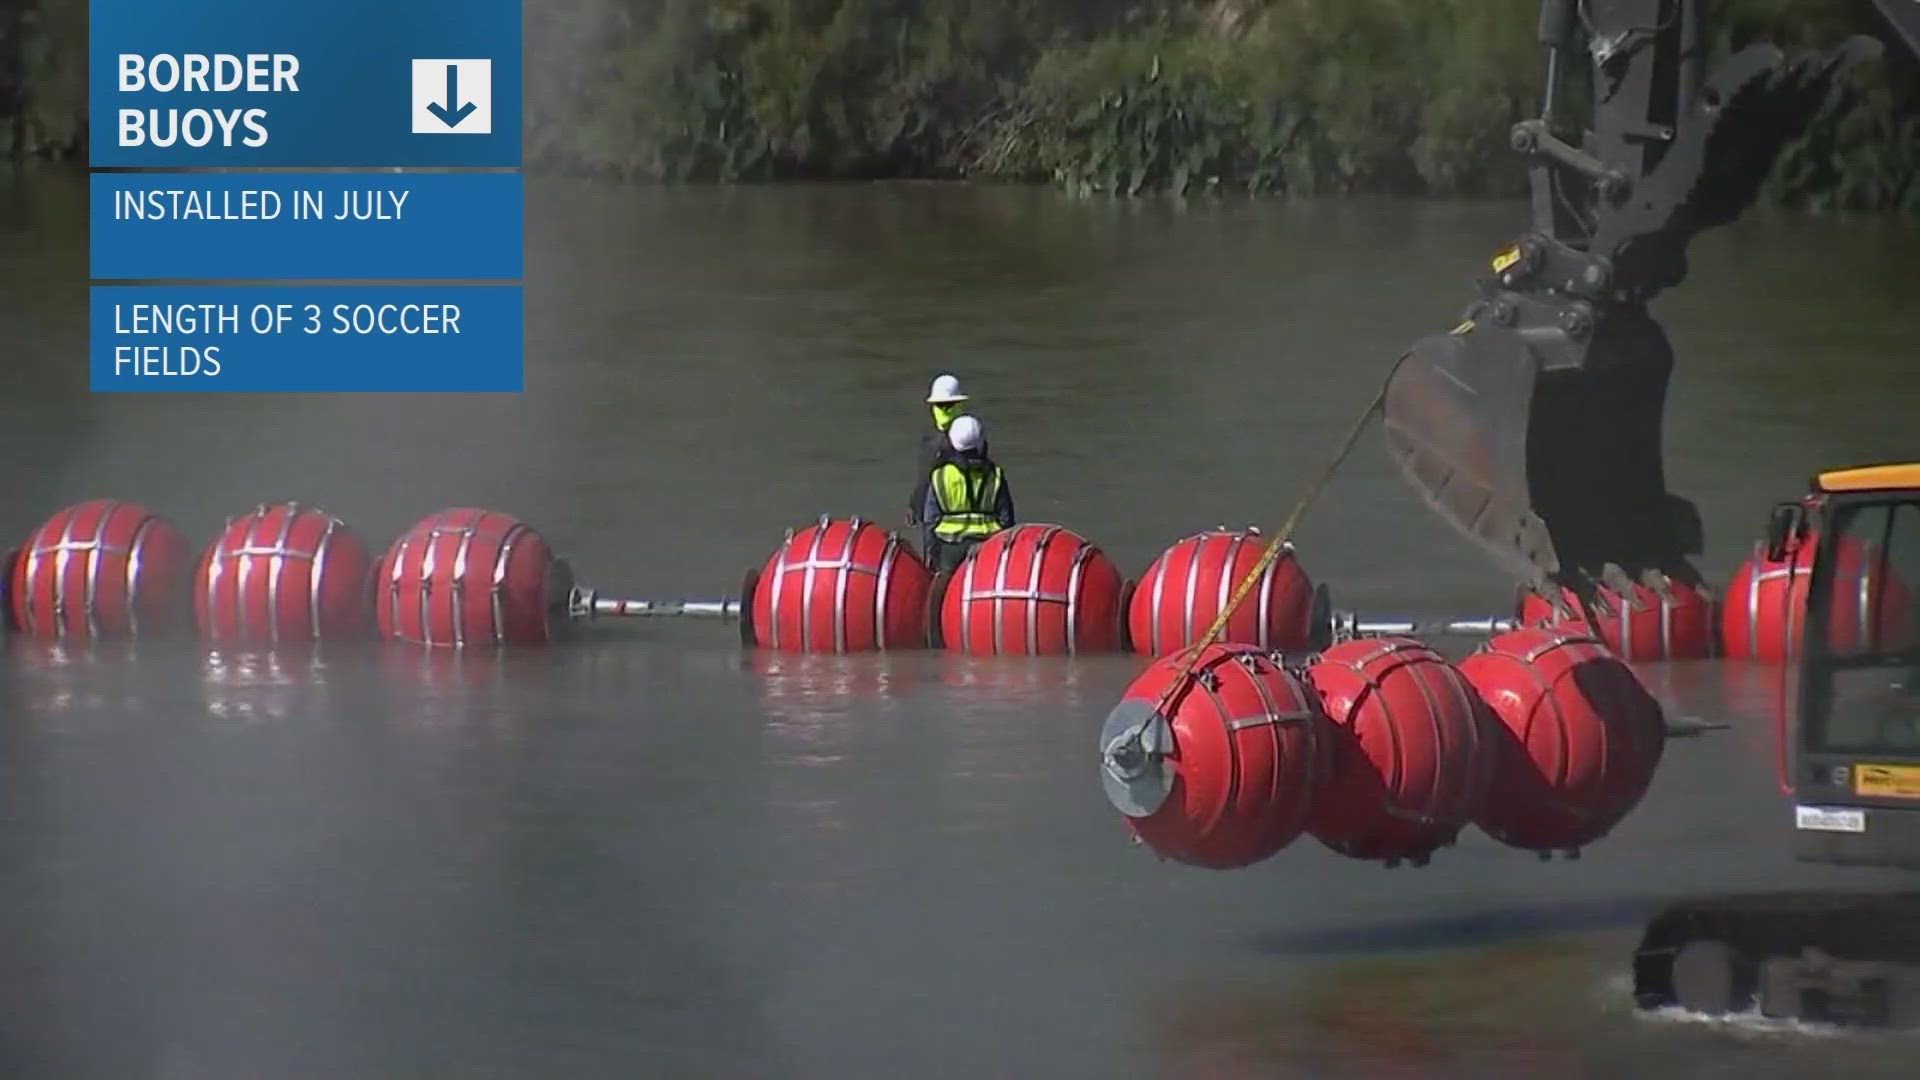 Officials have not said specifically where the person died or how long their body was trapped in the floating buoy wall on the Rio Grande.